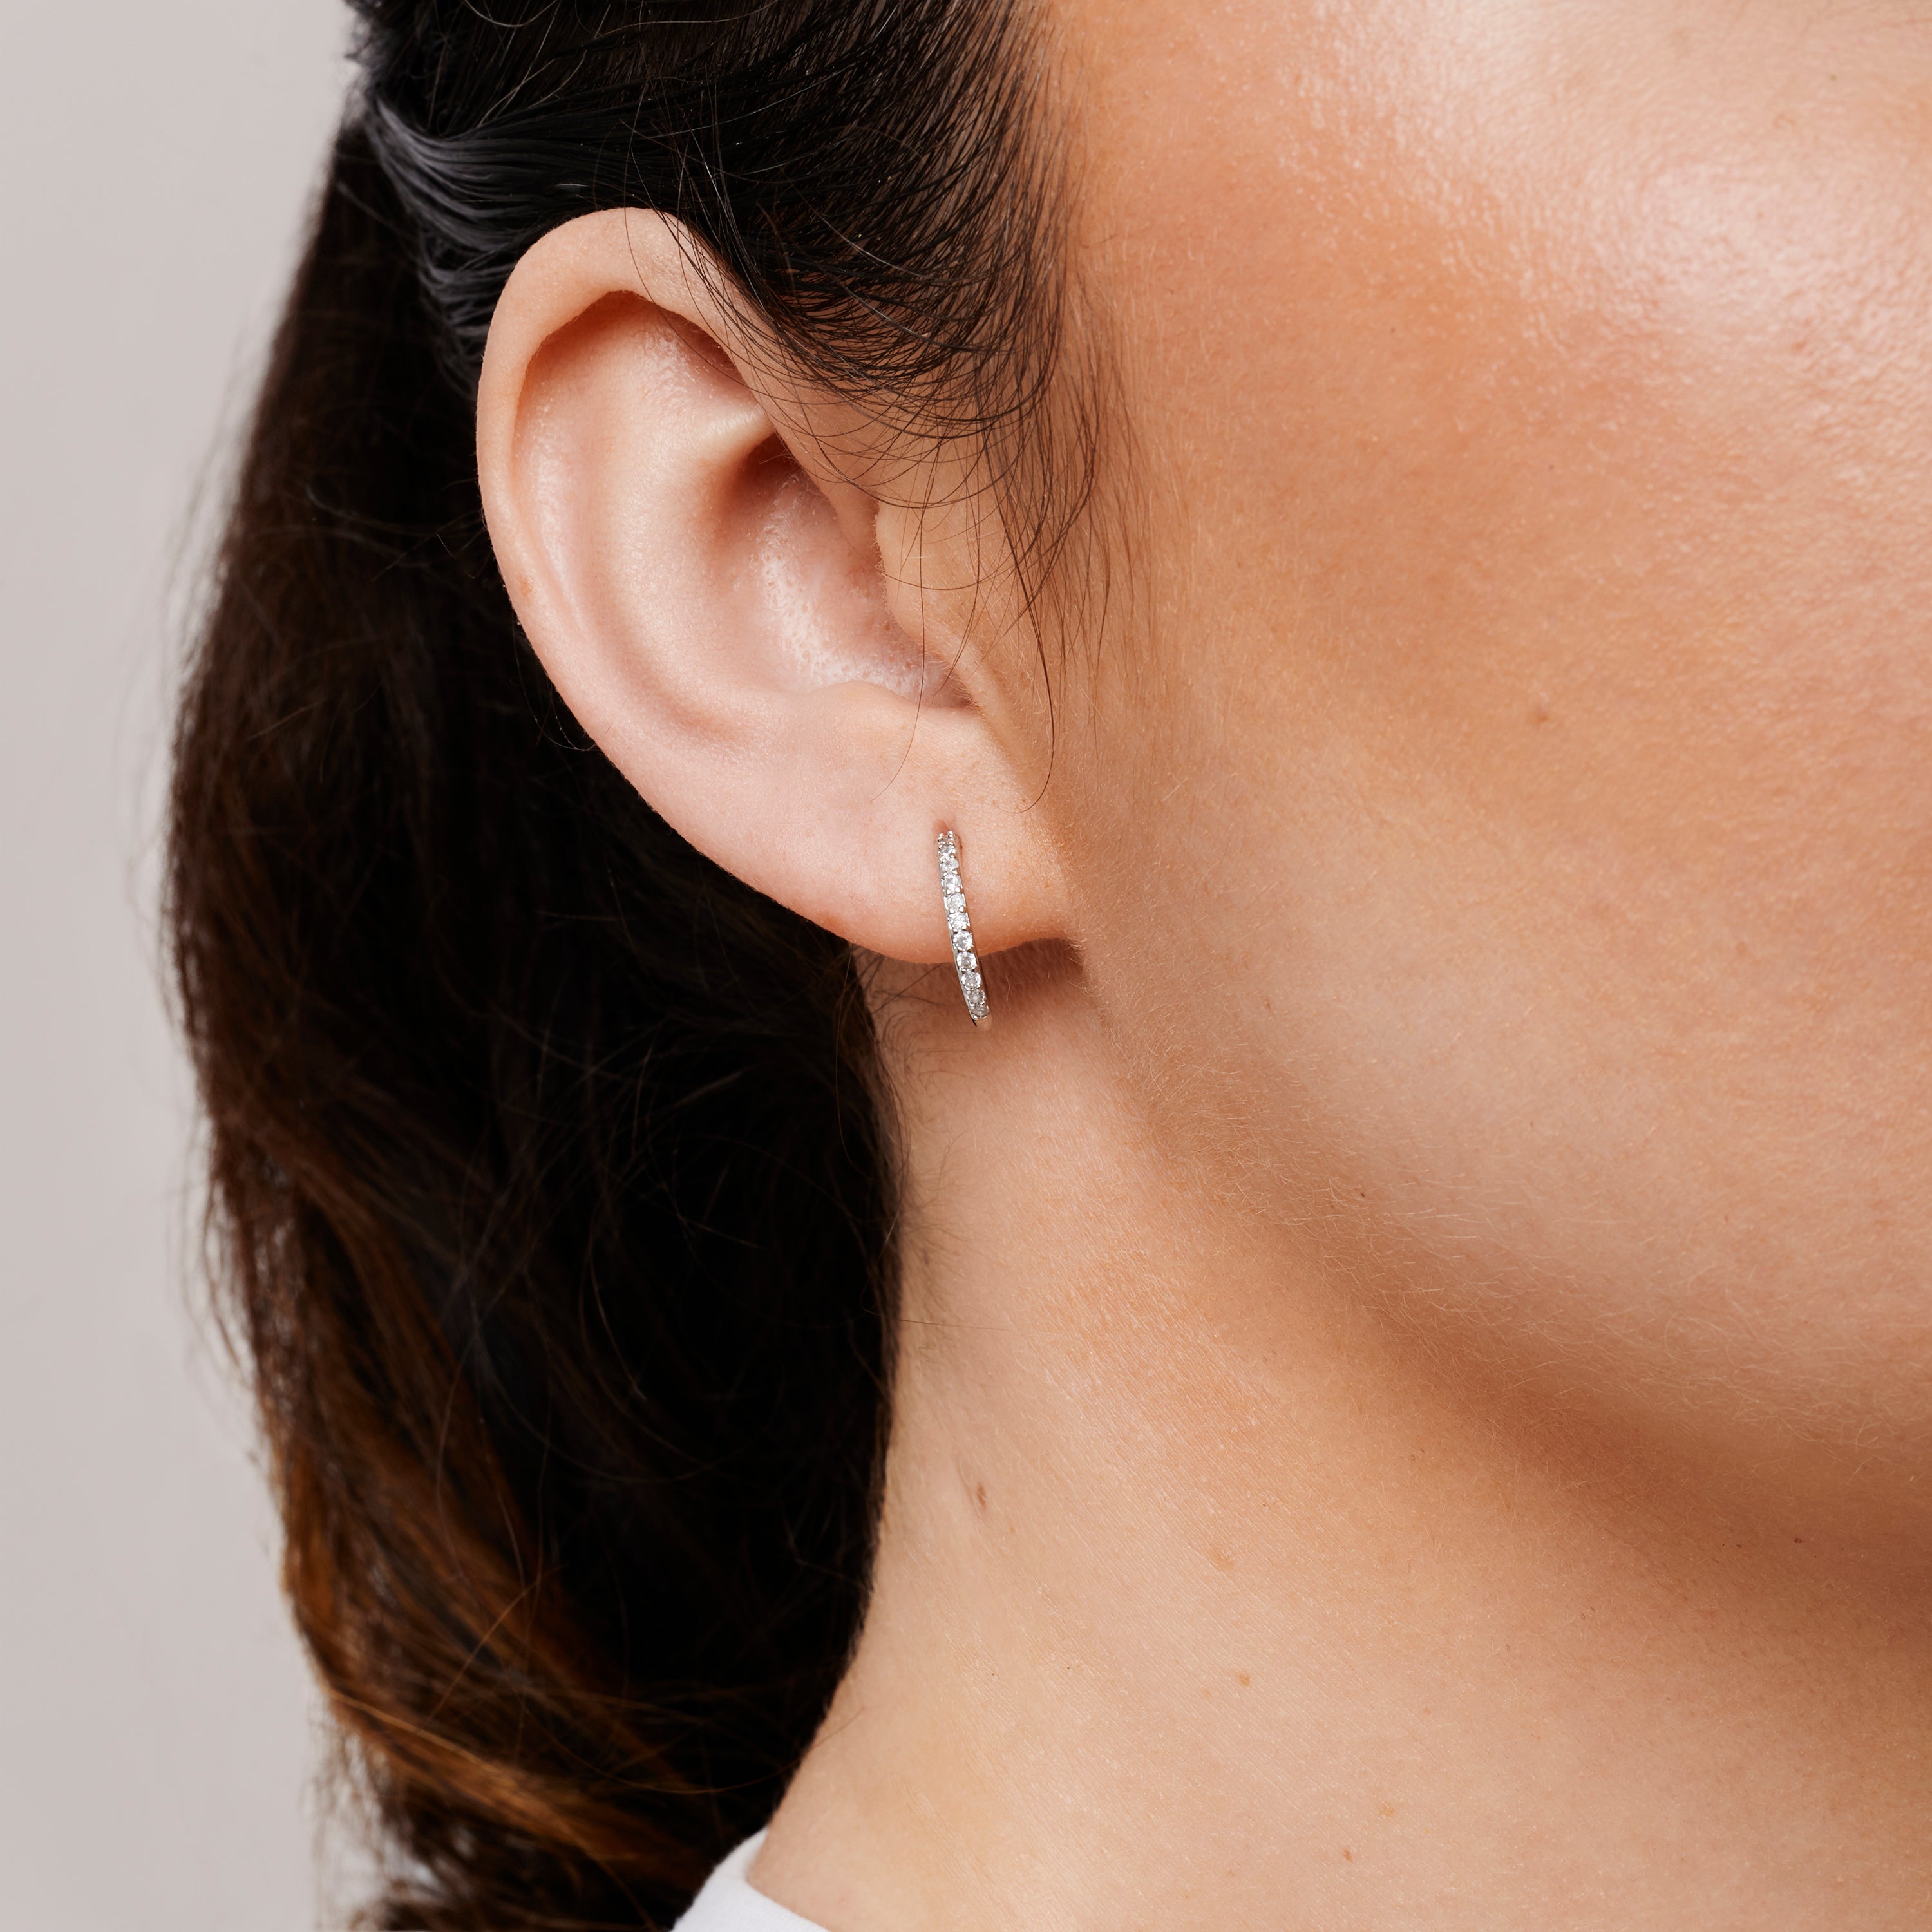 A model wearing the Medium Pavé Hoop Clip On Earrings in Silver offer a Mosquito Coil Clip-On Closure, making them ideal for Thick/Large Ears, Sensitive Ears, Small/Thin Ears, Stretched/Healing Ears, and Keloid Prone Ears. They provide an average comfortable wear duration of 24 hours with a medium secure hold, and can be gently adjusted by squeezing the padding forward once on the ear. Please note that this item is only one pair.